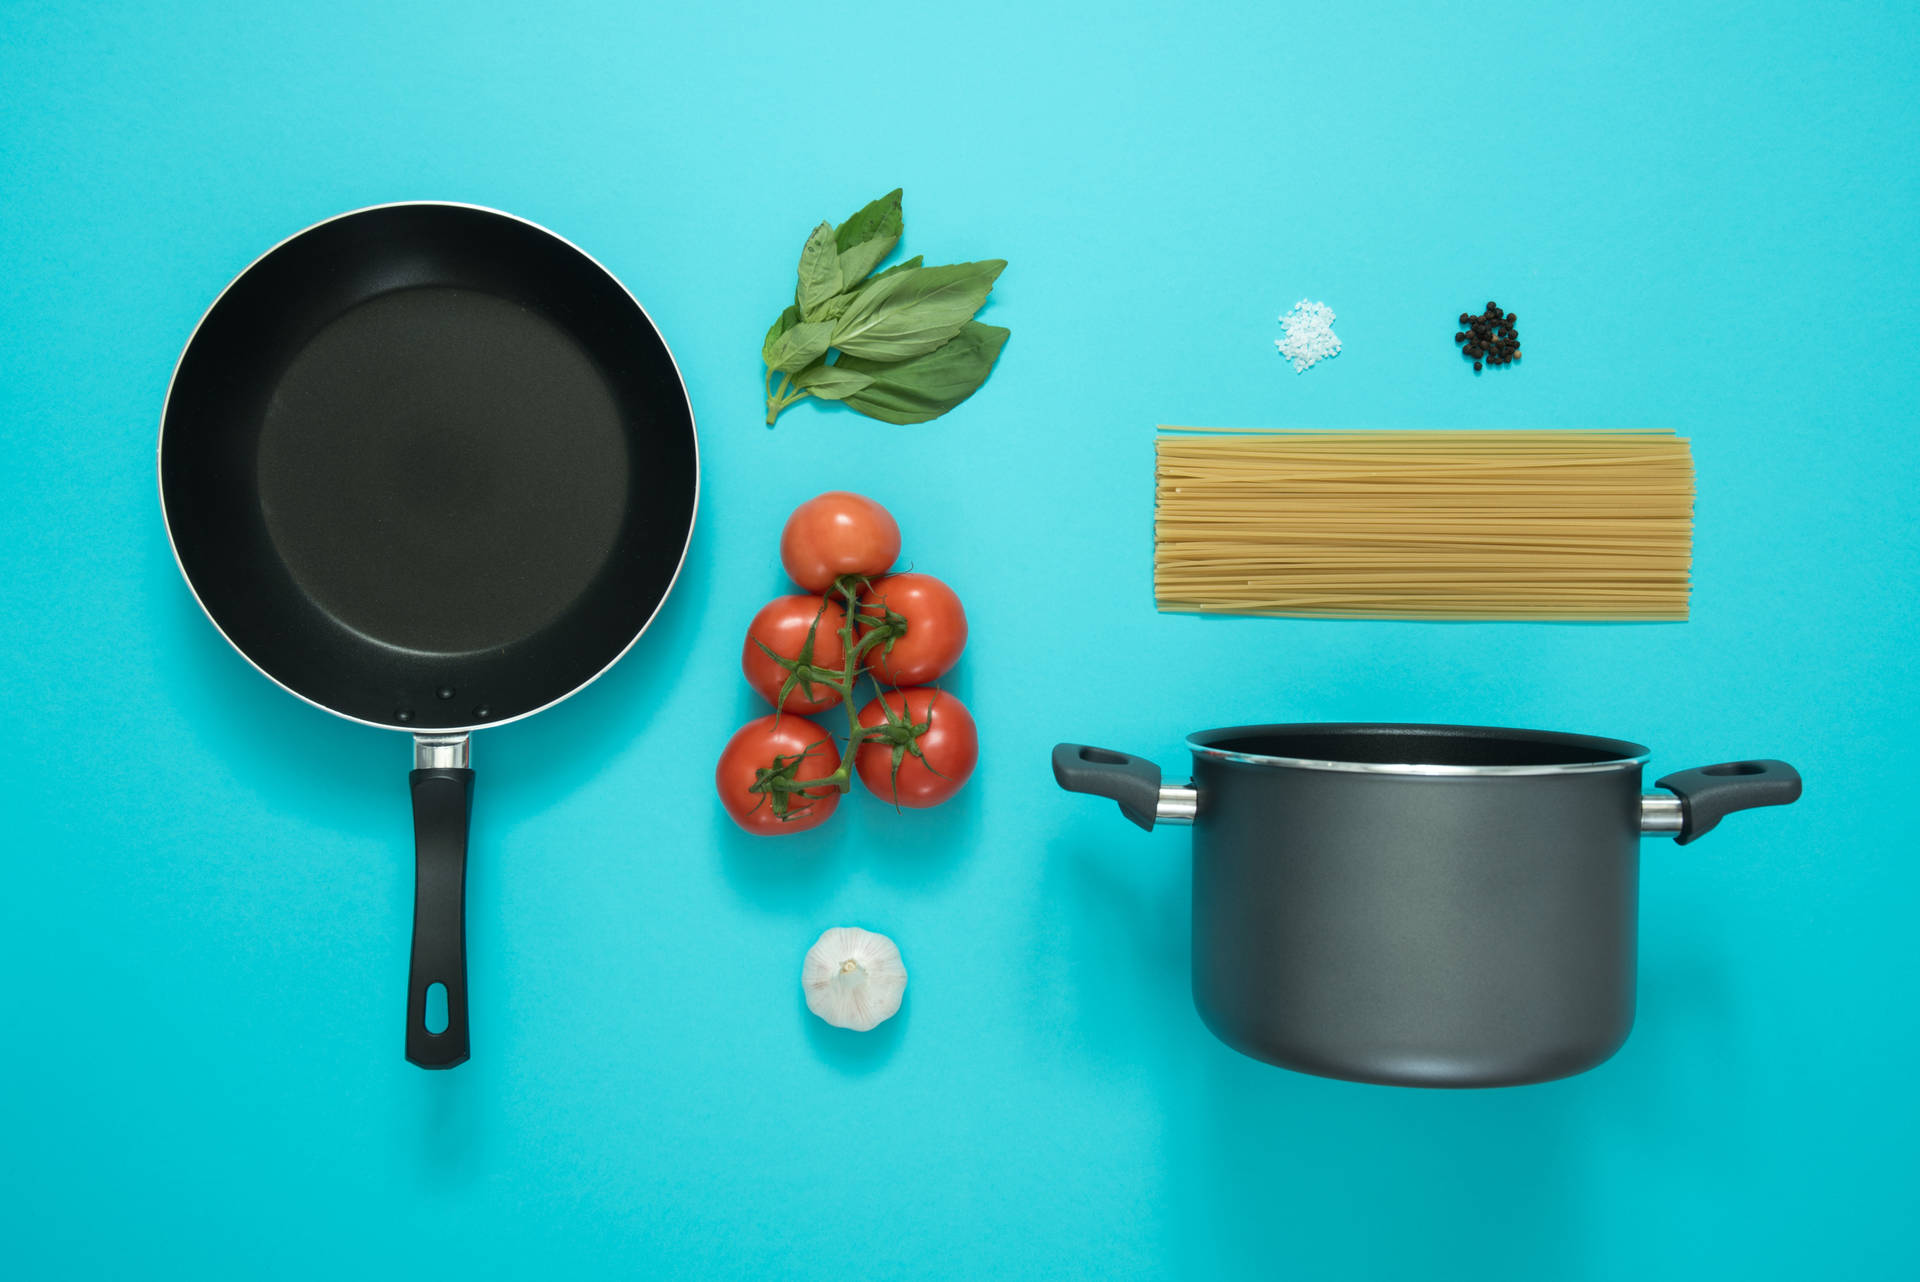 Get Creative In The Kitchen With These Cute Cooking Essentials!